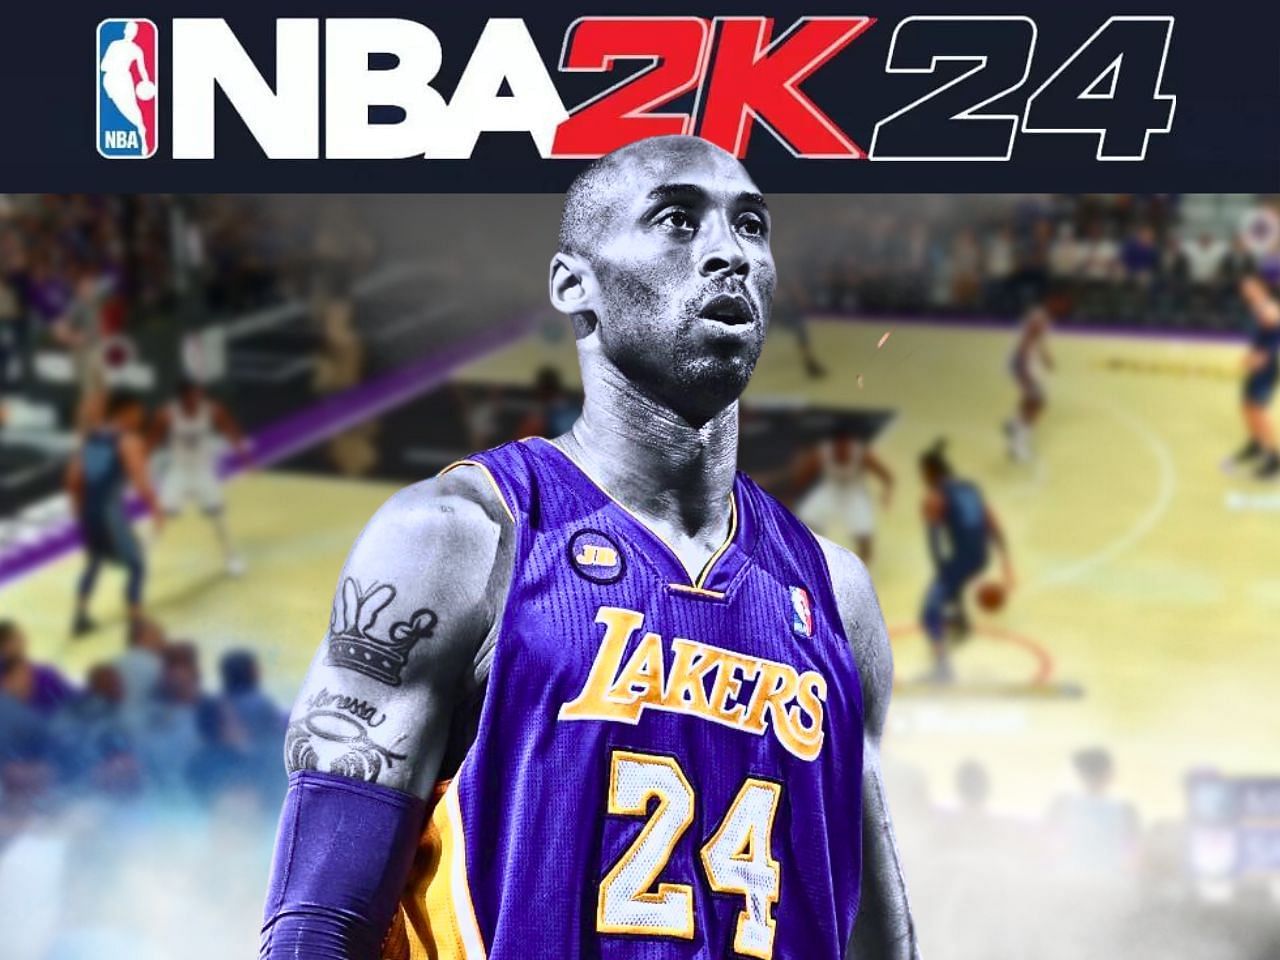 NBA 2K24 release date, pre-order and latest news